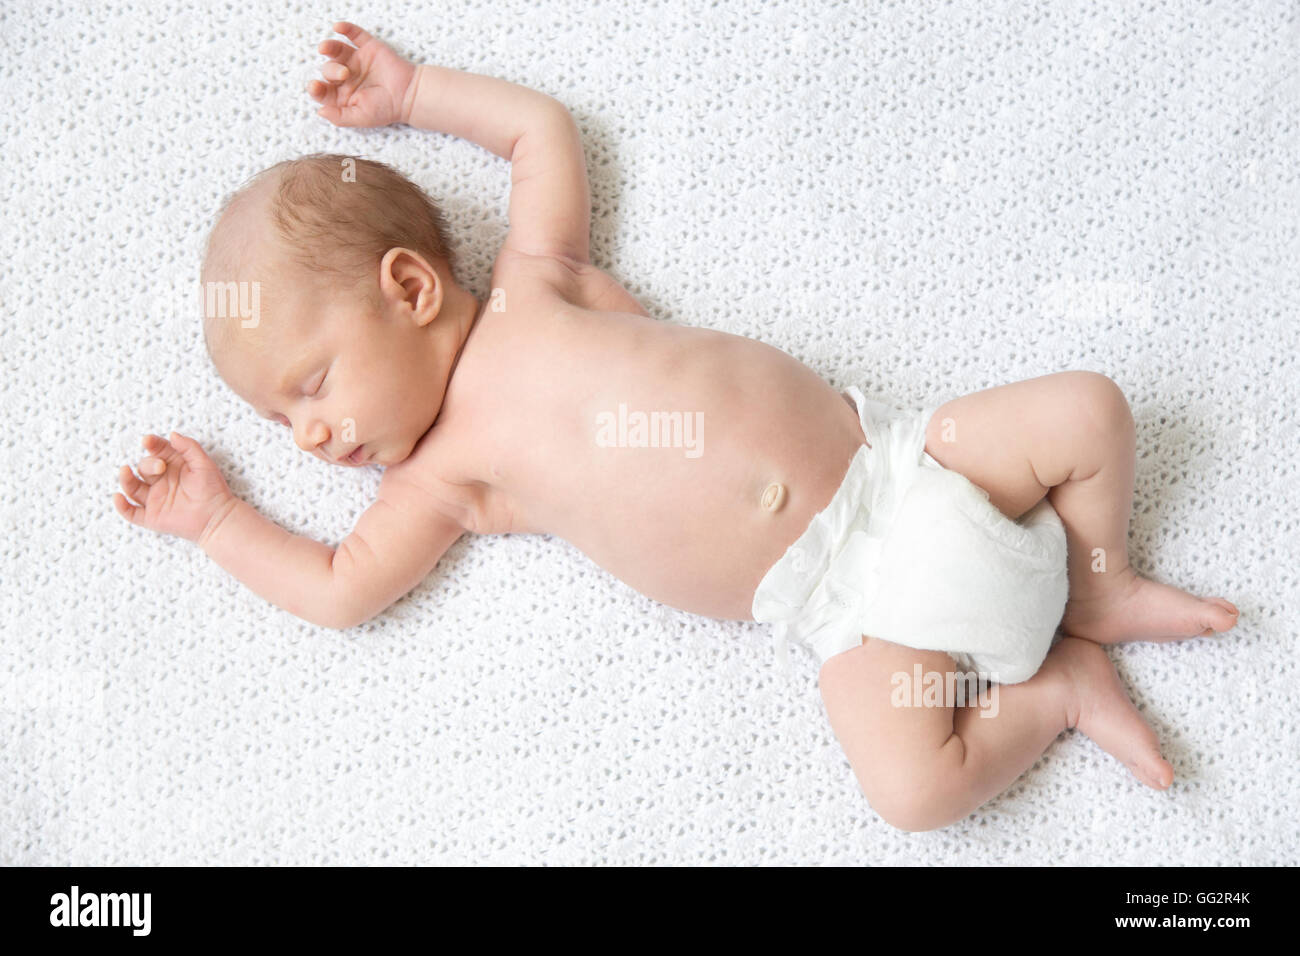 Portrait of young funny newborn babe napping on white knitted blanket with his arms up. Cute new born child sleeping. Healthy Stock Photo